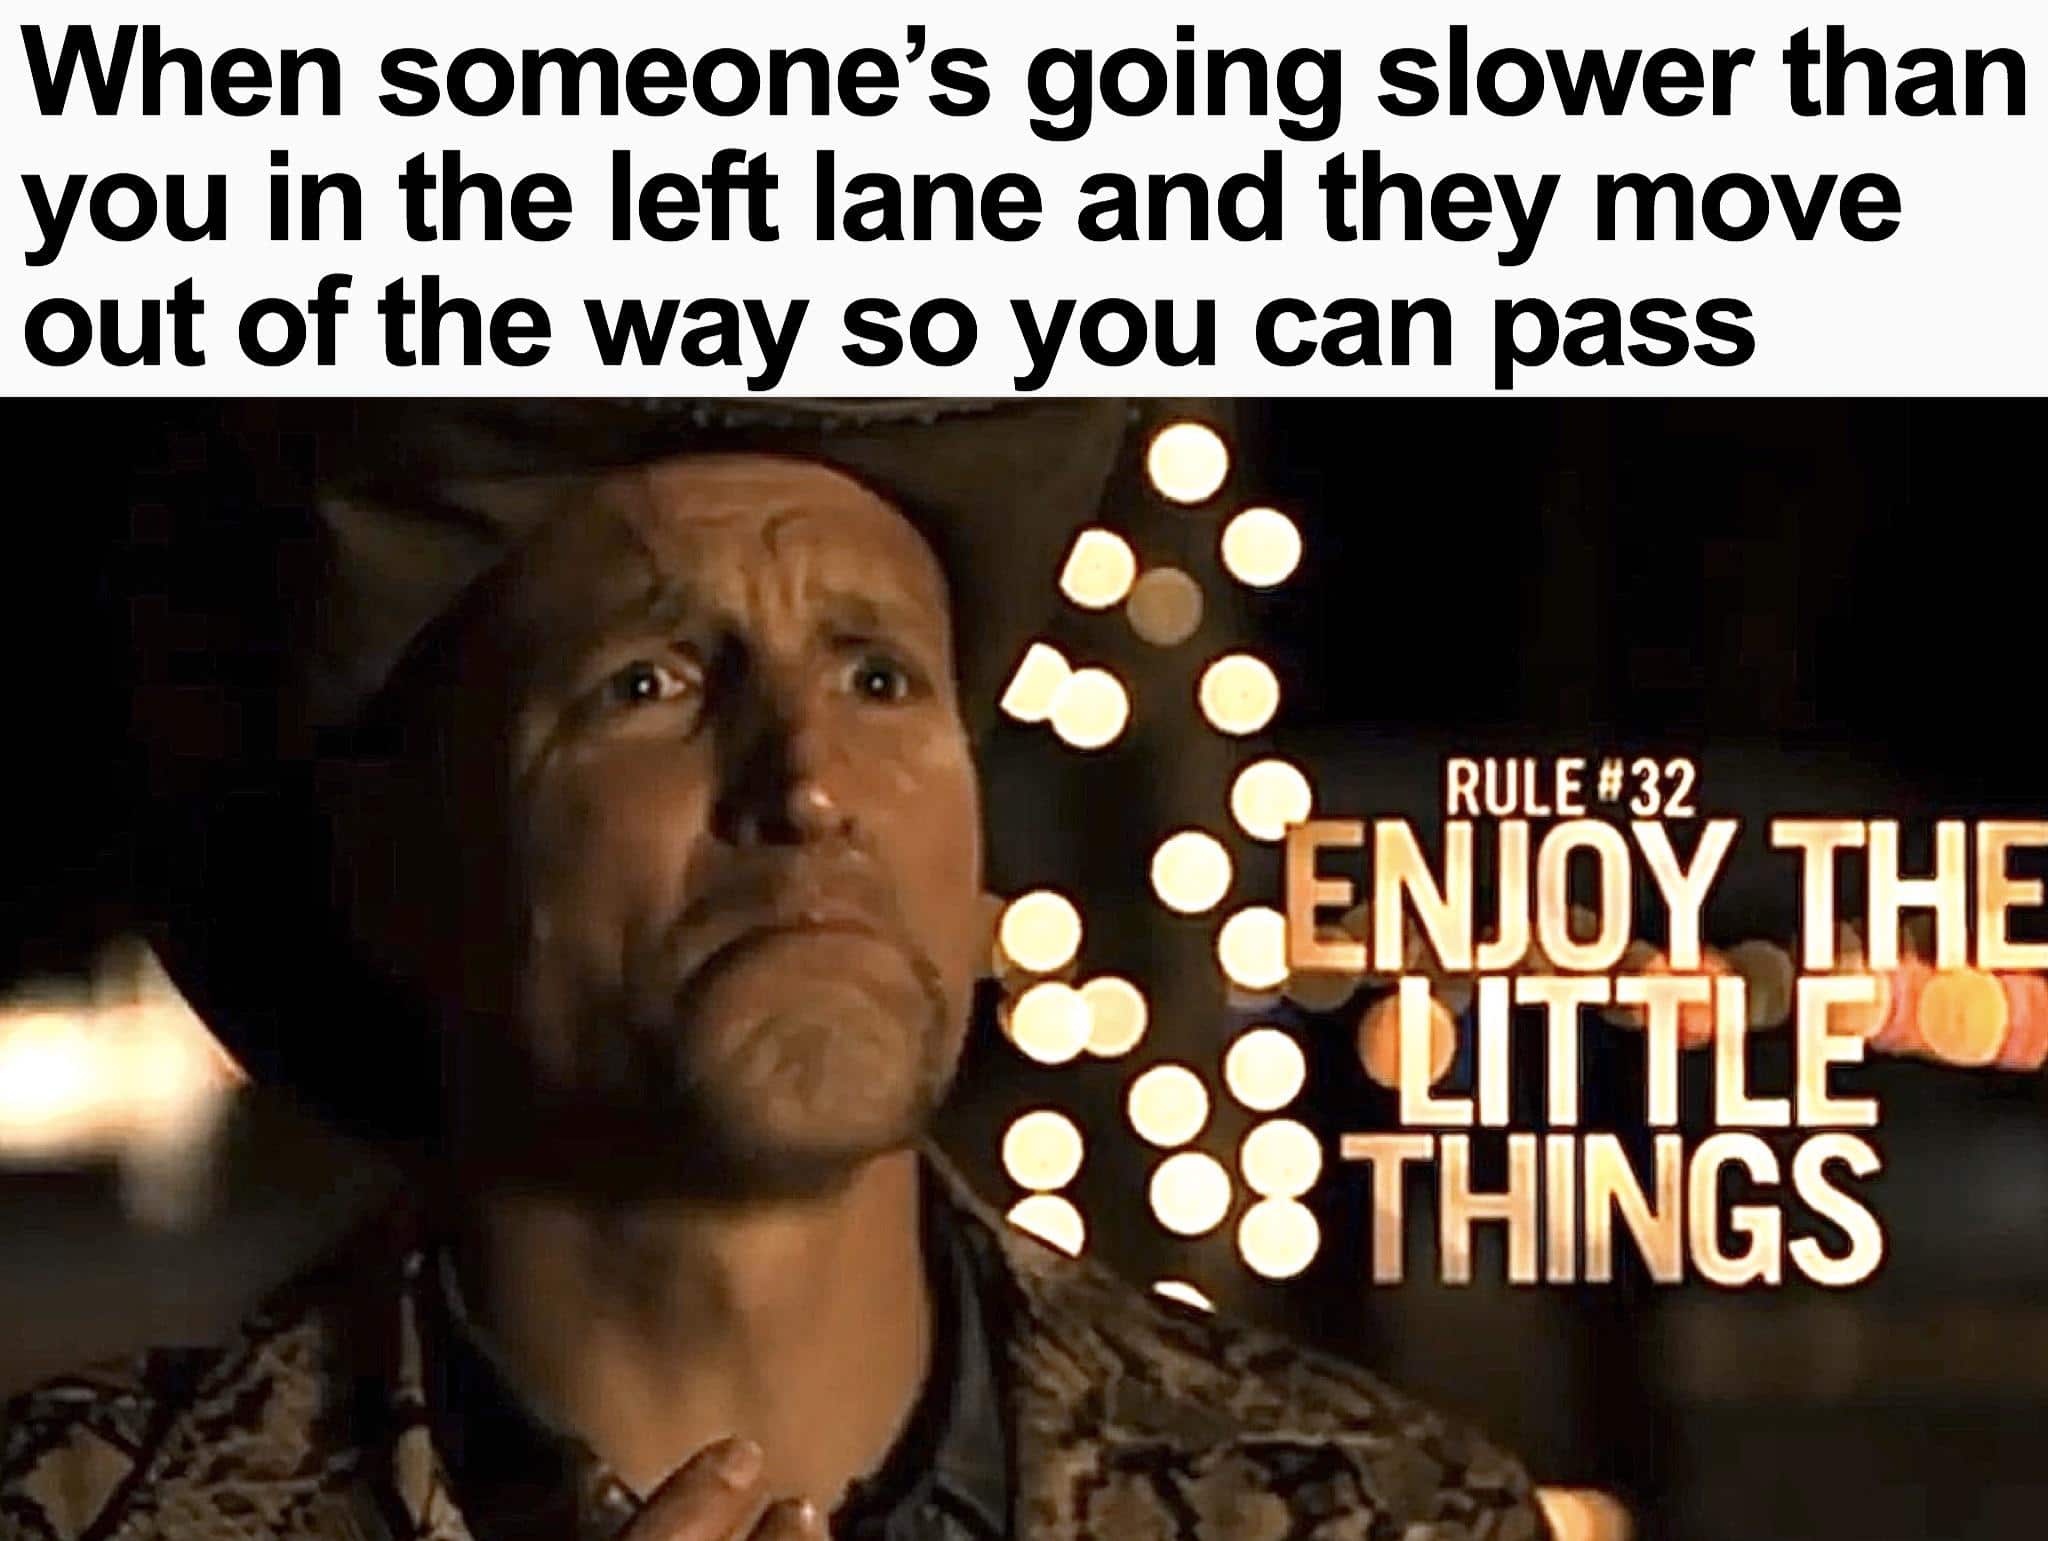 cute wholesome-memes cute text: When someone's going slower than you in the left lane and they move out of the way so you can pass 000 {LITTL 28 THINGS 